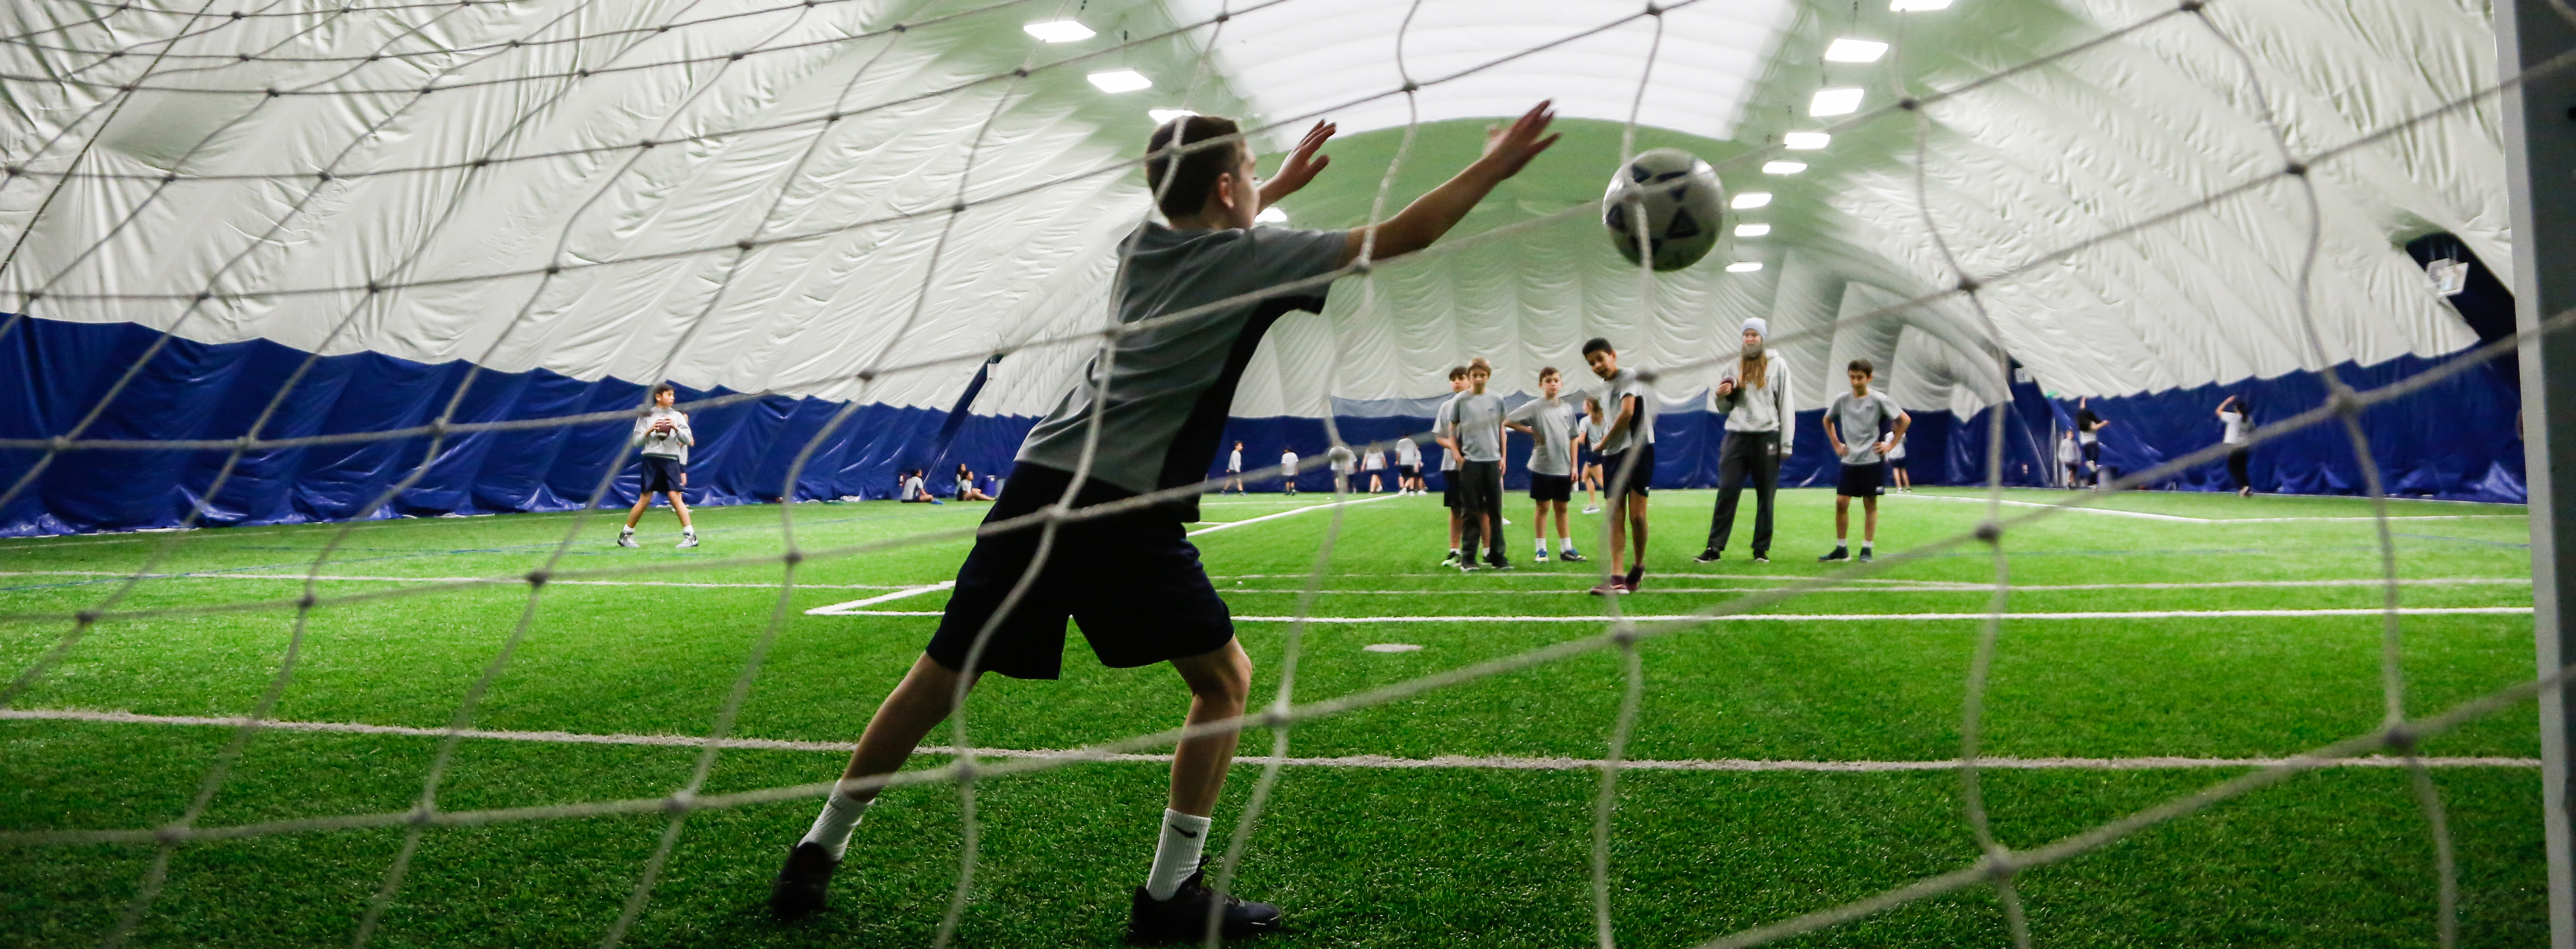 Boys playing indoor soccer in a dome